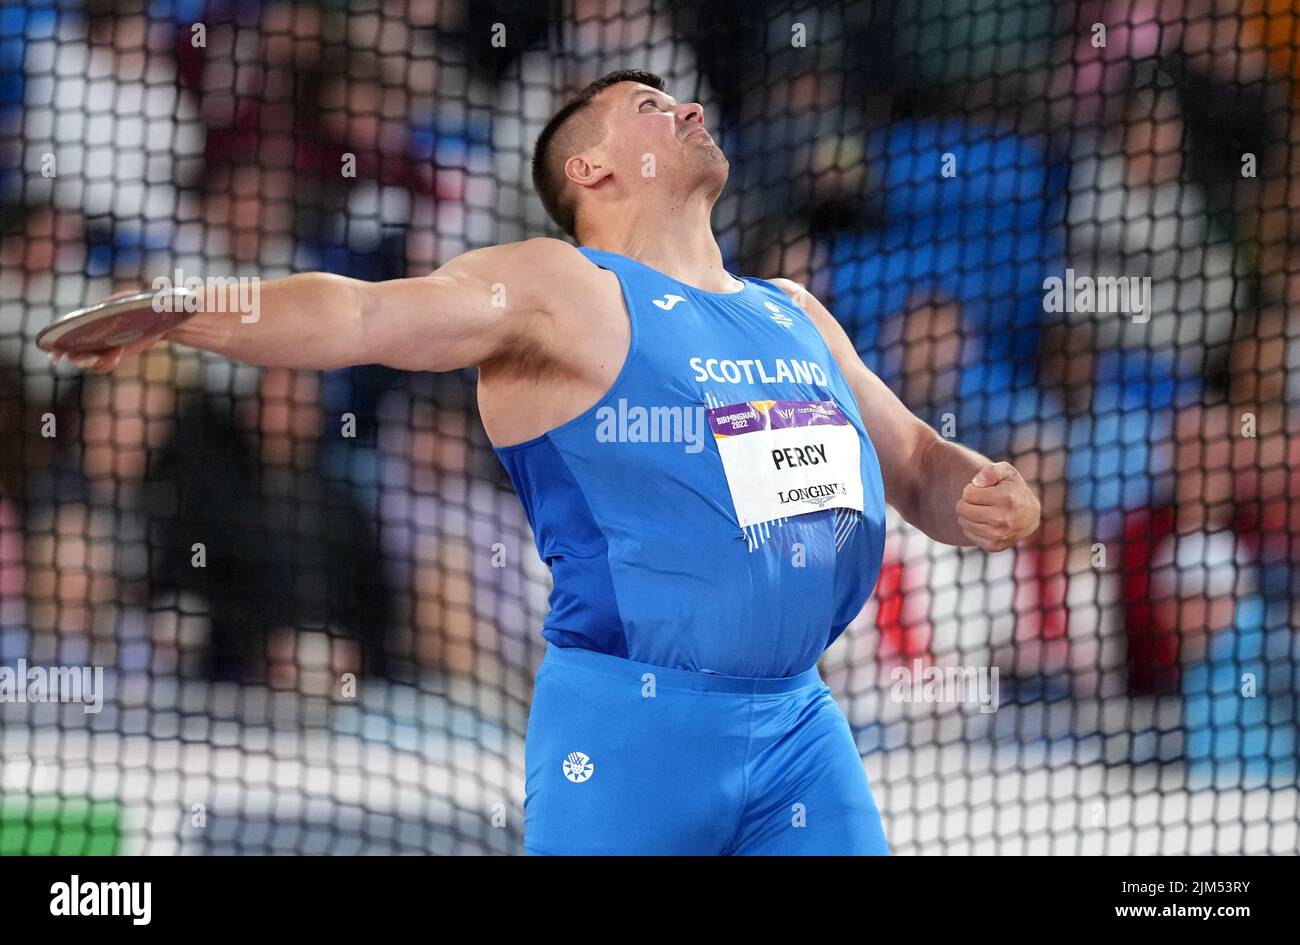 Scotland's Nicholas Percy during the Men's Discus Throw Final at Alexander Stadium on day seven of the 2022 Commonwealth Games in Birmingham. Picture date: Thursday August 4, 2022. Stock Photo